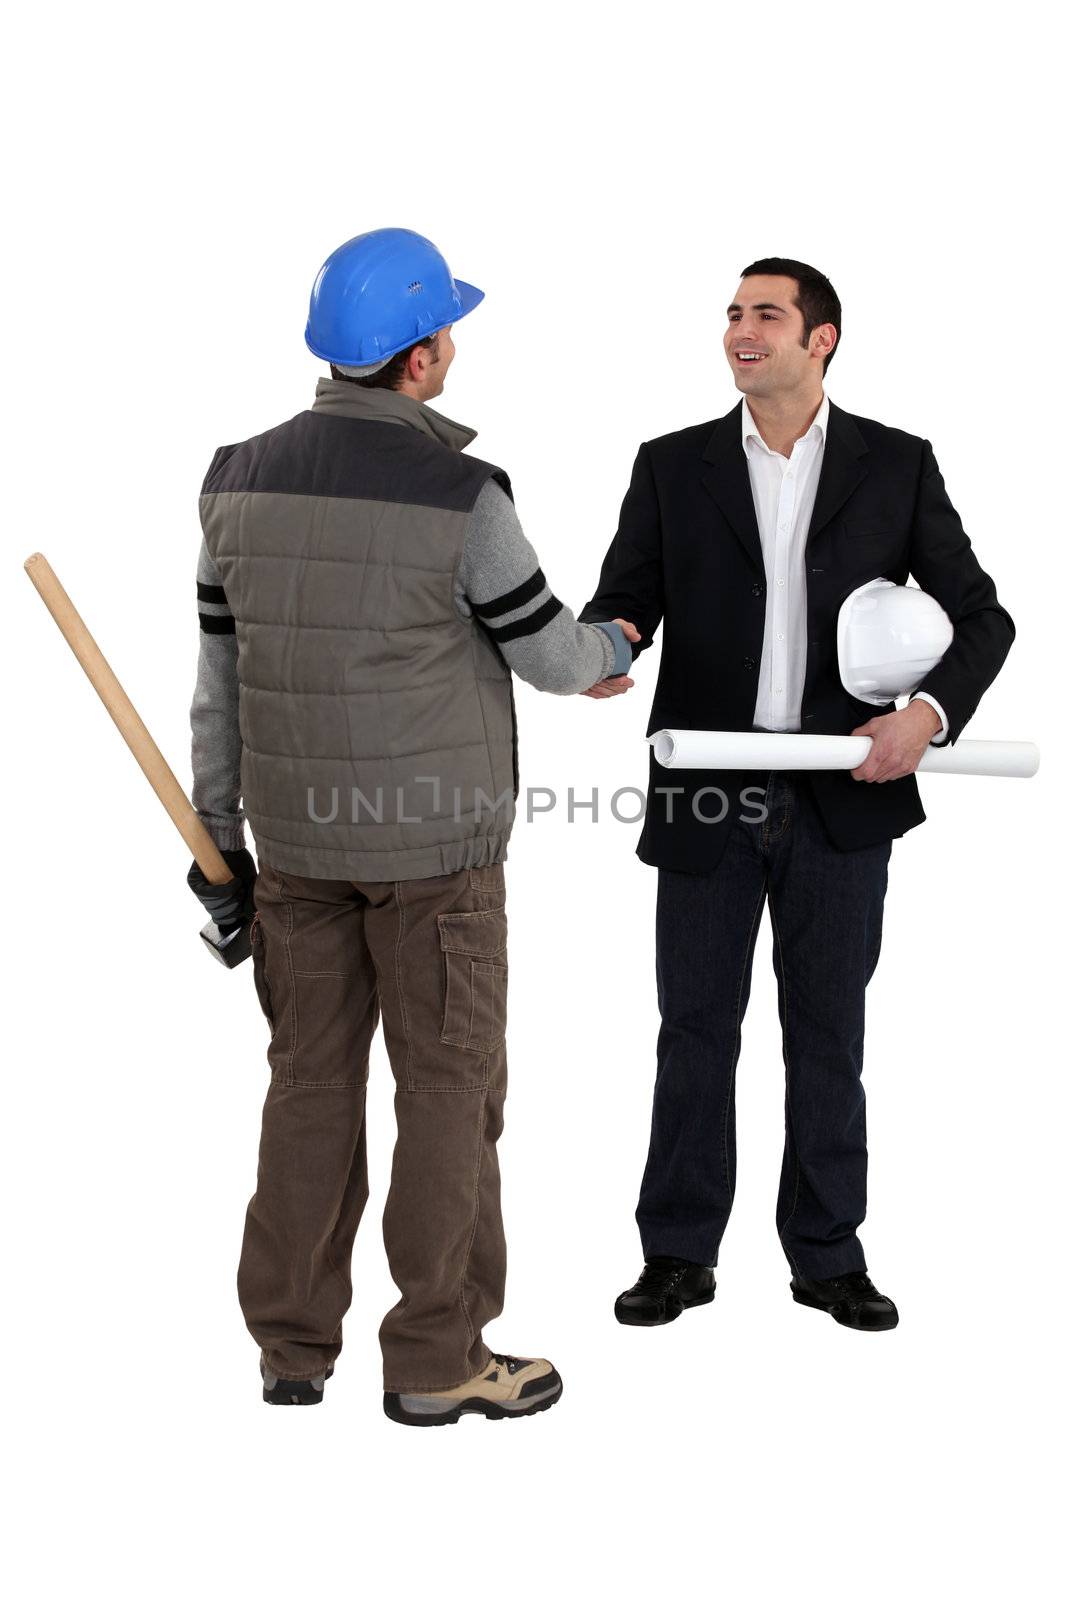 Architect shaking laborer's hand by phovoir